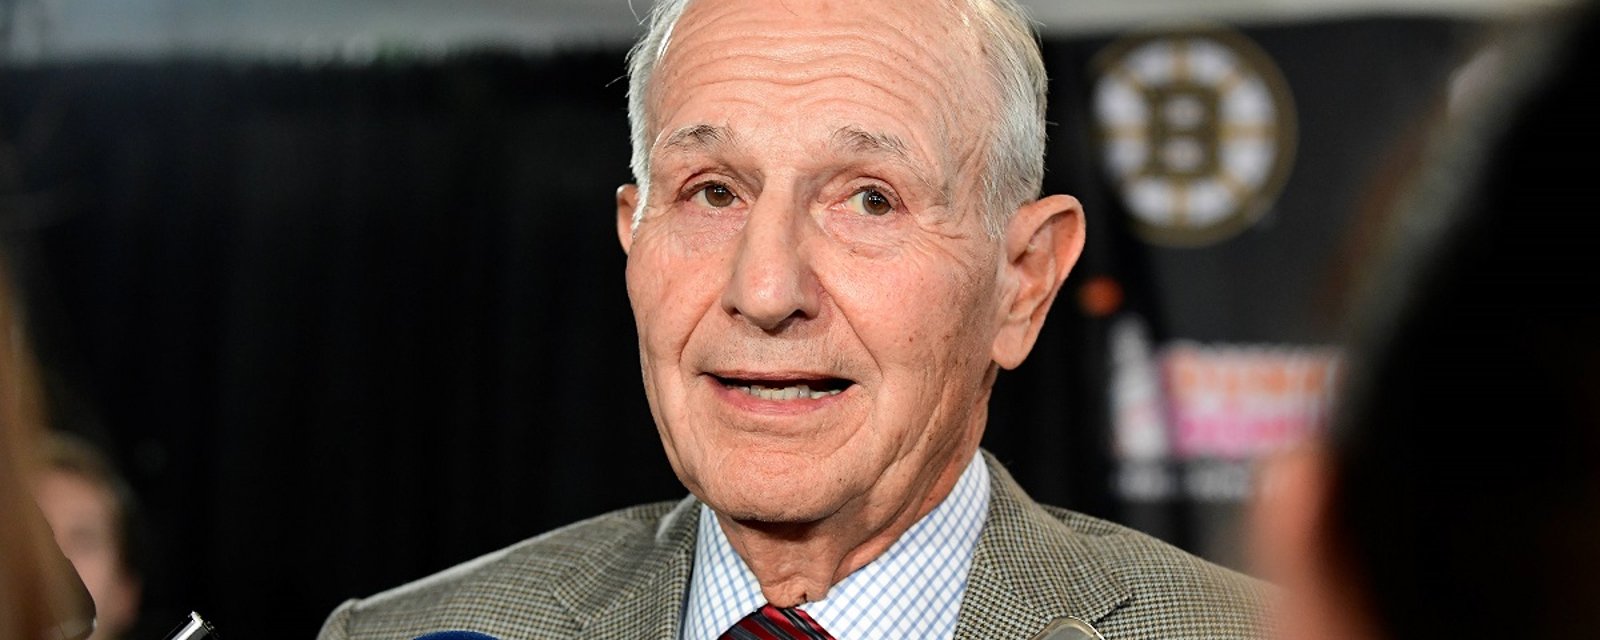 Rumor: Bruins owner Jeremy Jacobs behind the delays to the NHL season.